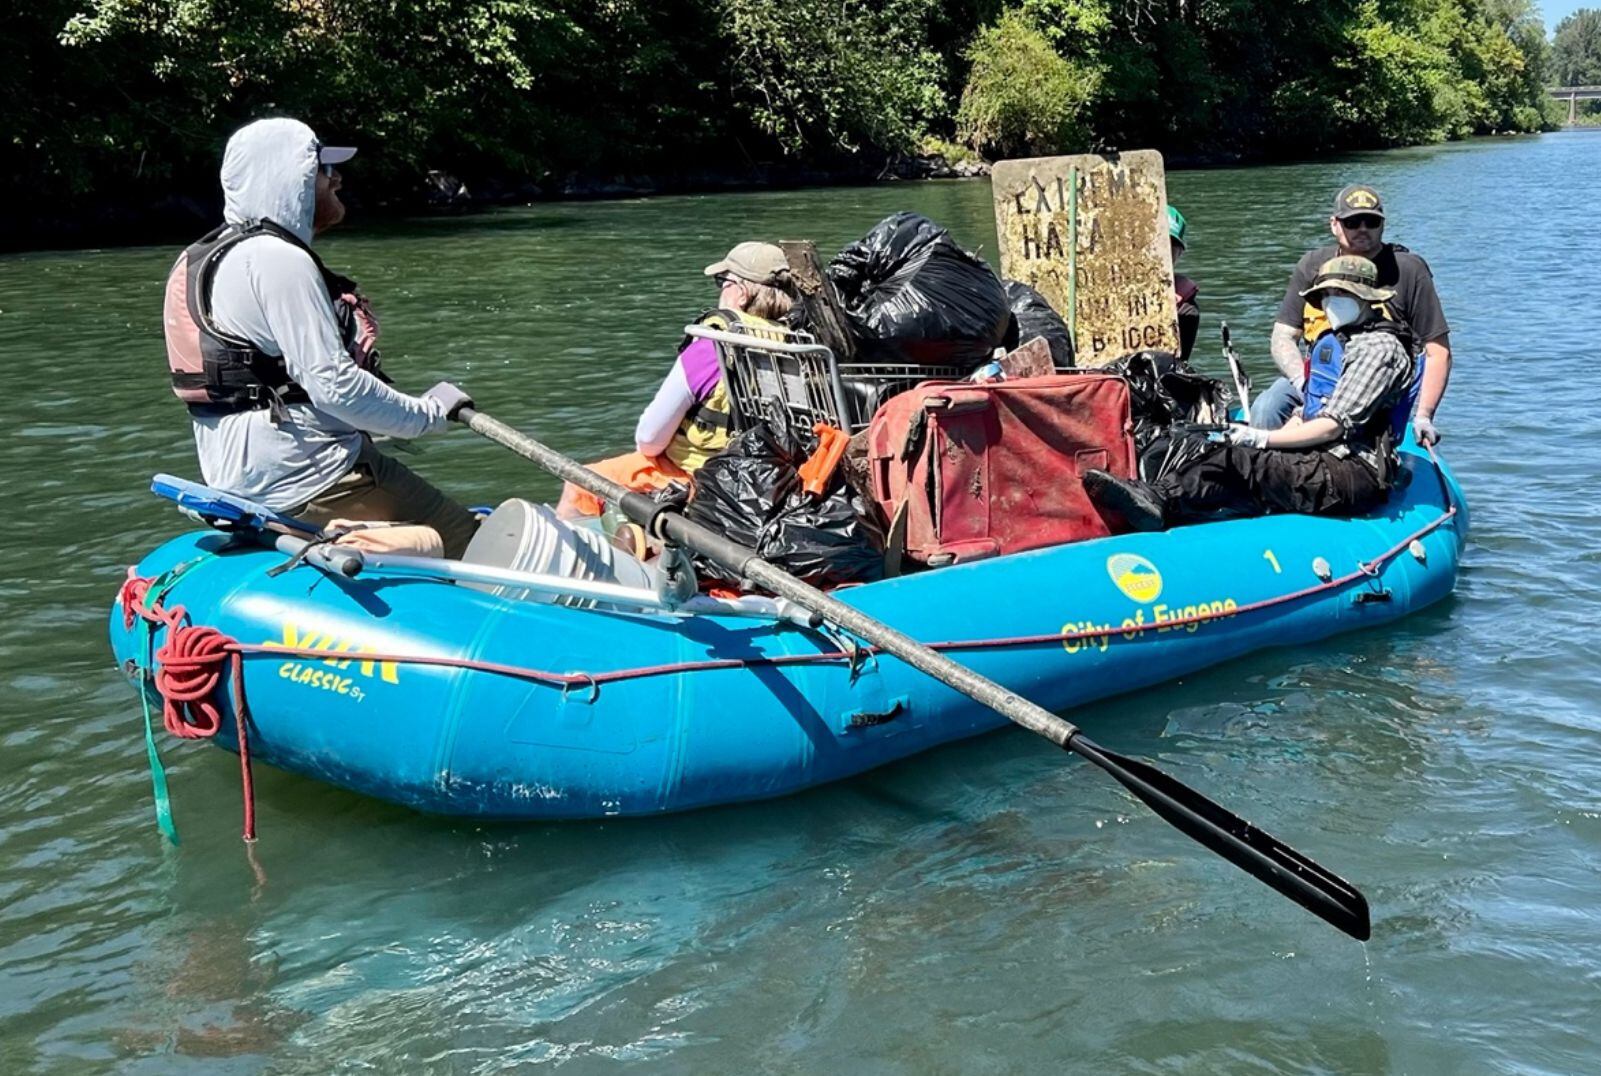 In this provided photo, volunteers with Willamette Riverkeeper use a raft to carry trash found along the Willamette River in Eugene in 2022.